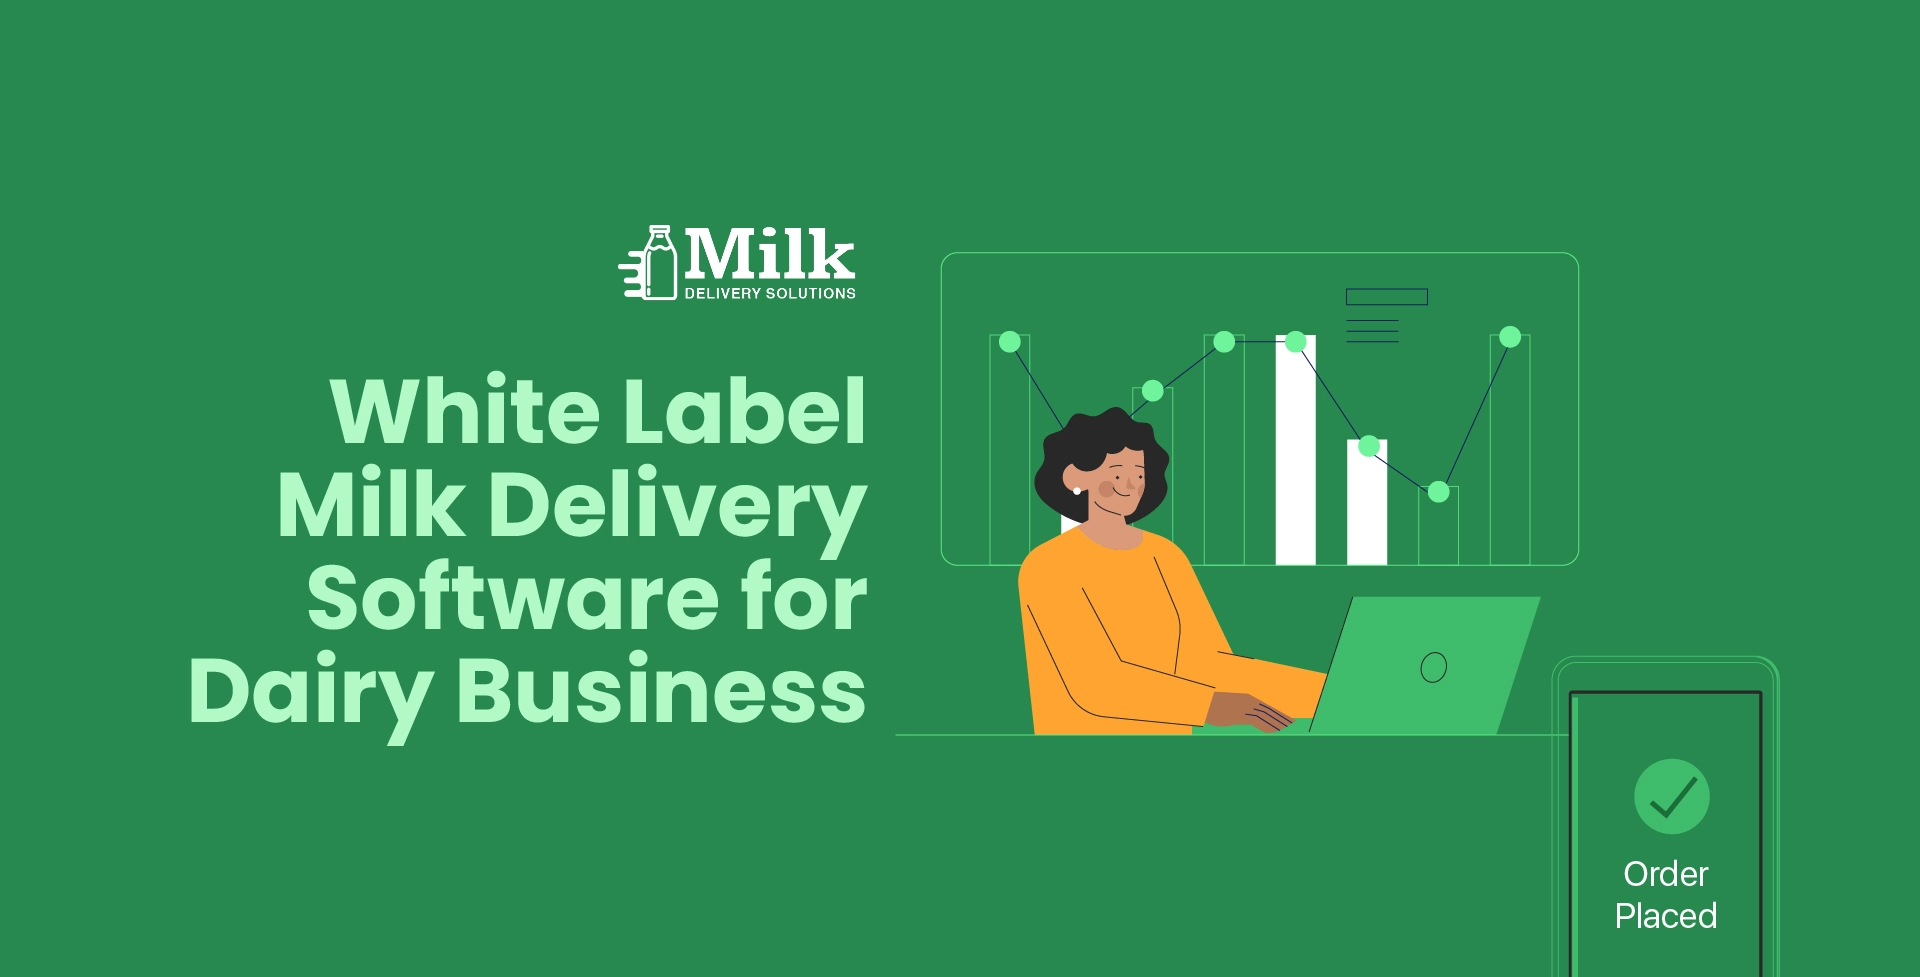 mds founded by ravi garg white label milk delivery software for your dairy business 